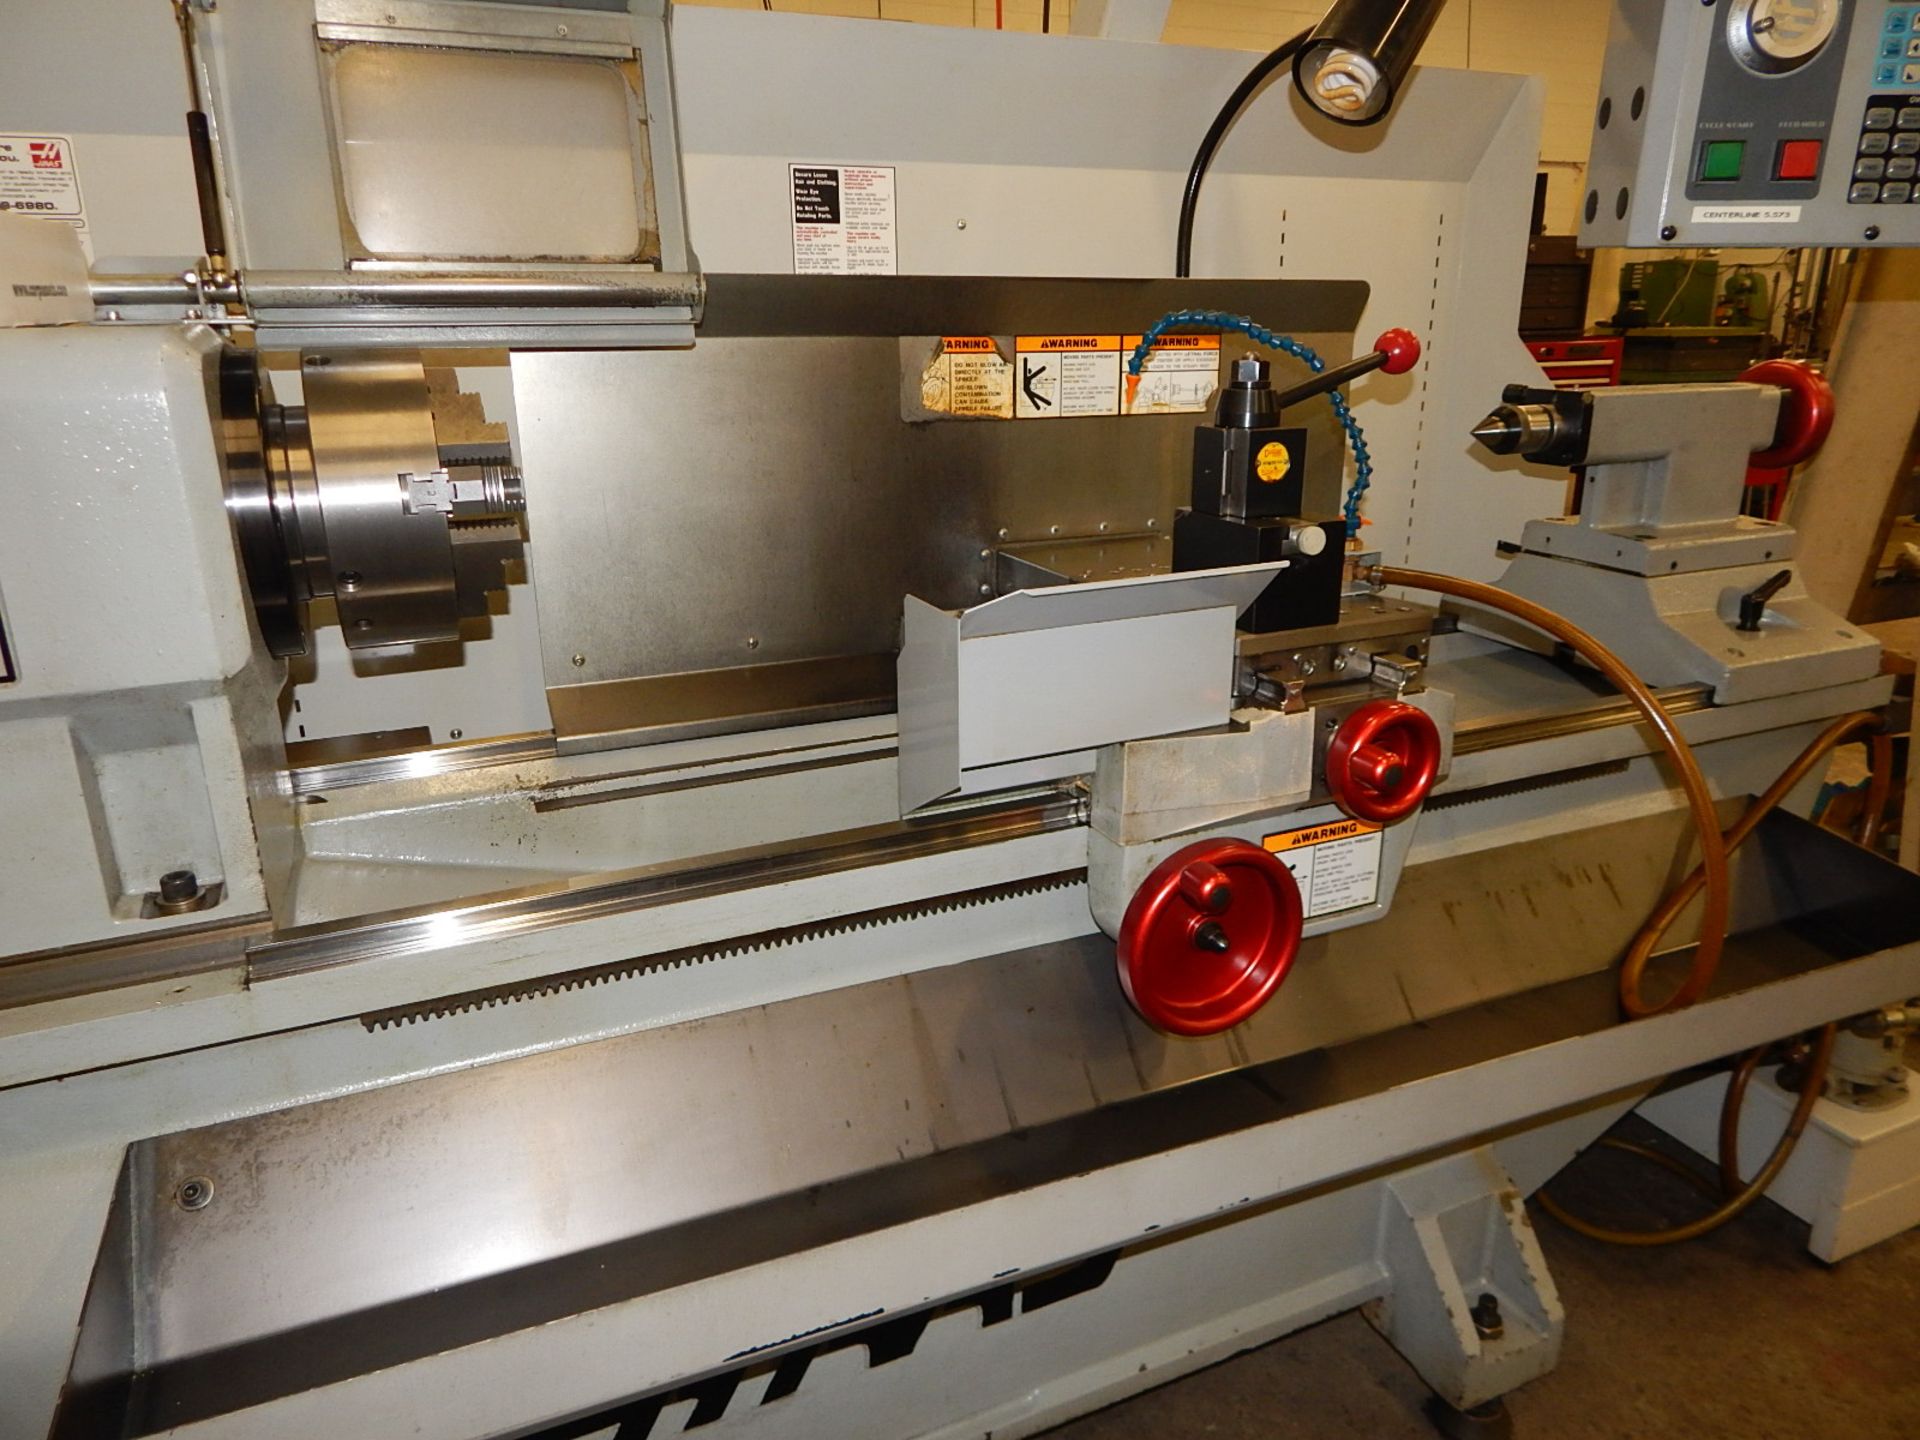 HAAS (02/2005) TR2 CNC LATHE WITH HAAS CNC CONTROL, 28" SWING, 52" BETWEEN CENTERS, 2.75" SPINDLE - Image 6 of 7